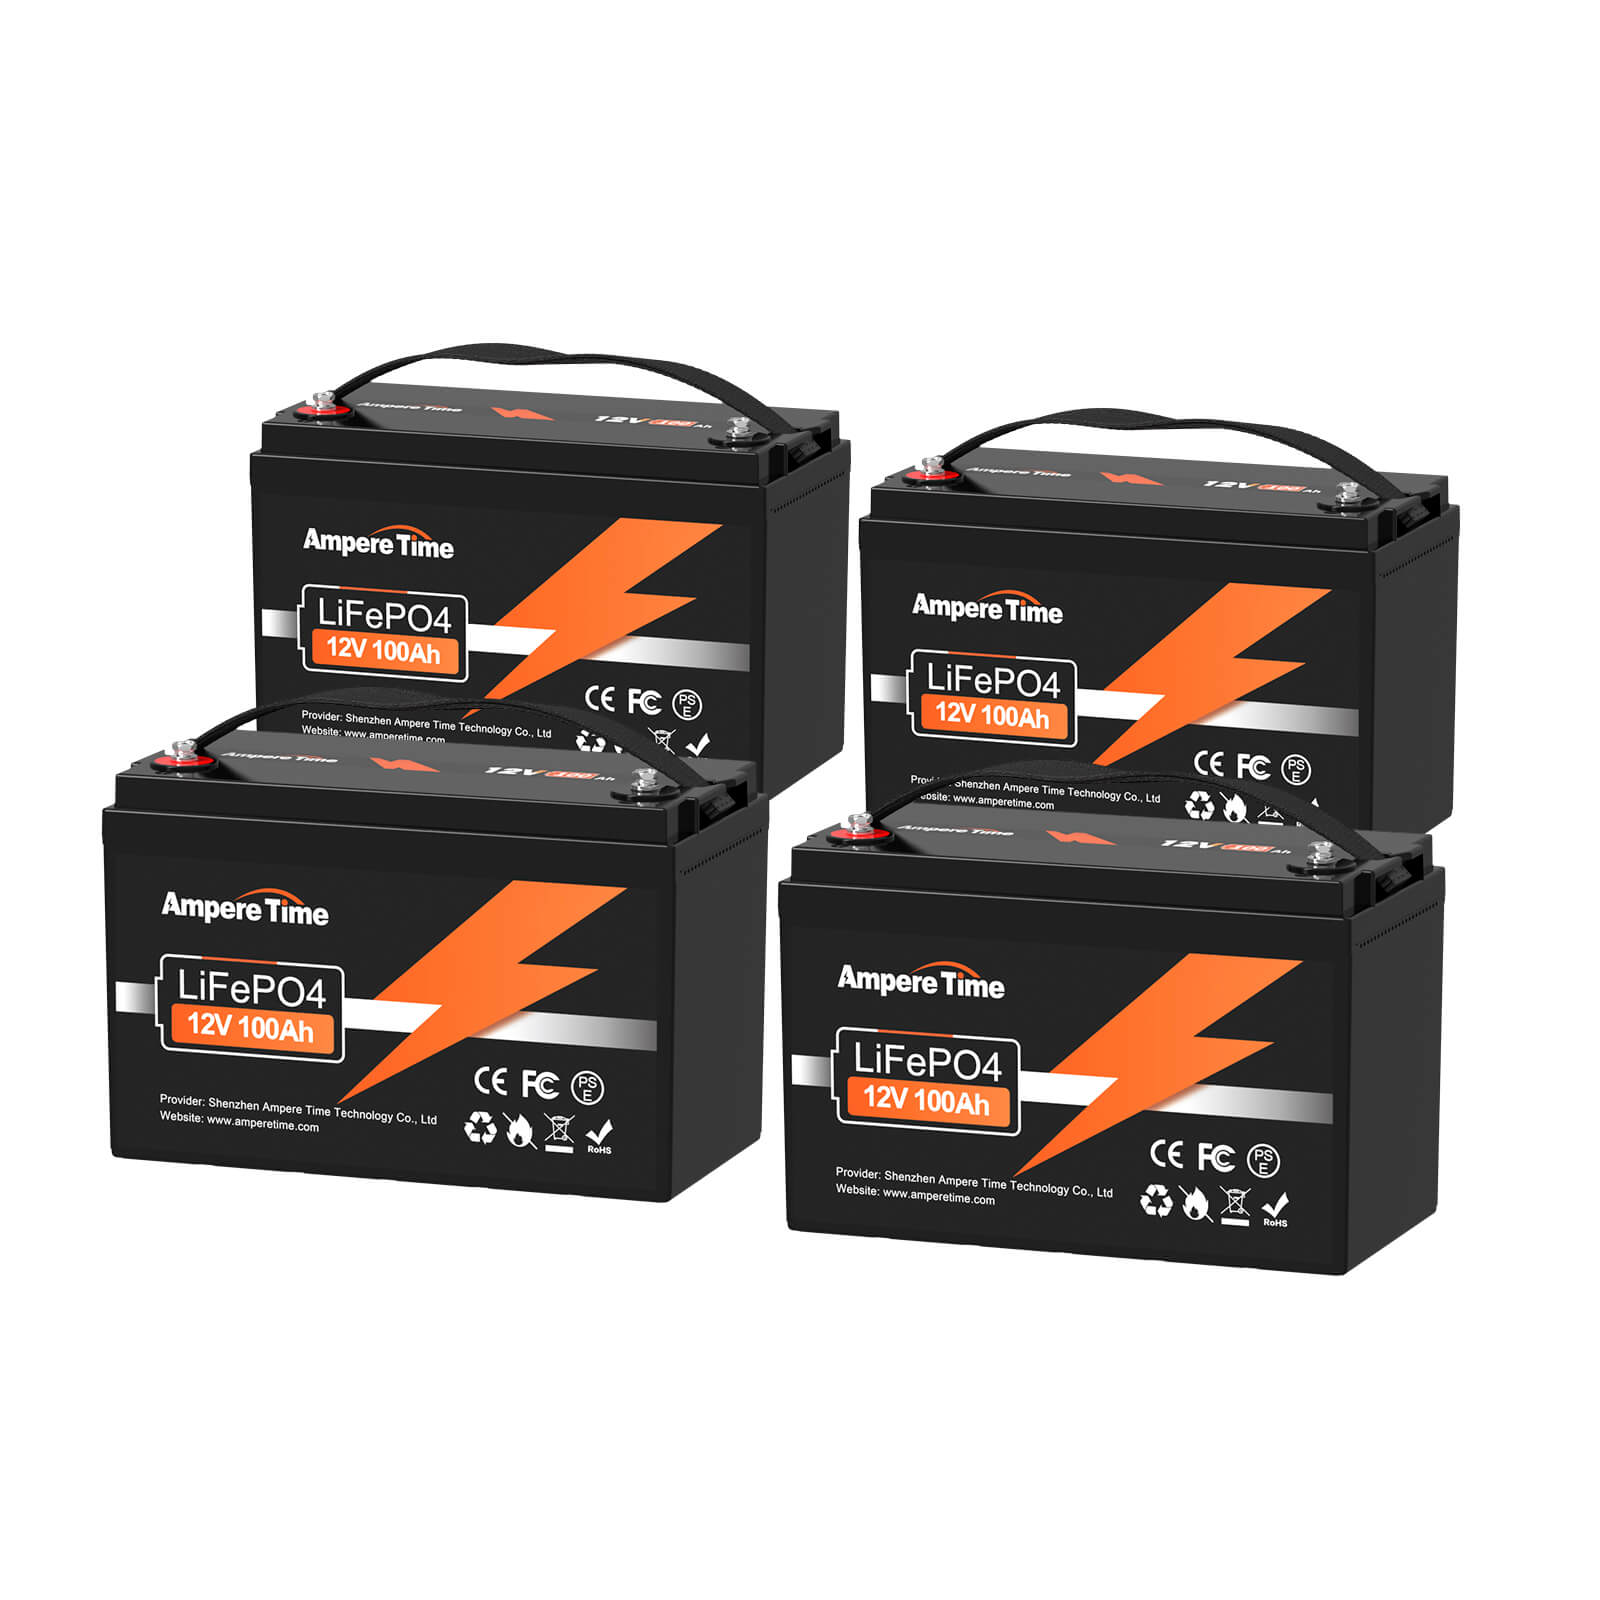 Ampere Time 12V 100Ah, 1280Wh Best RV Lithium Battery with 4000+ Deep Cycles & Built in 100A BMS